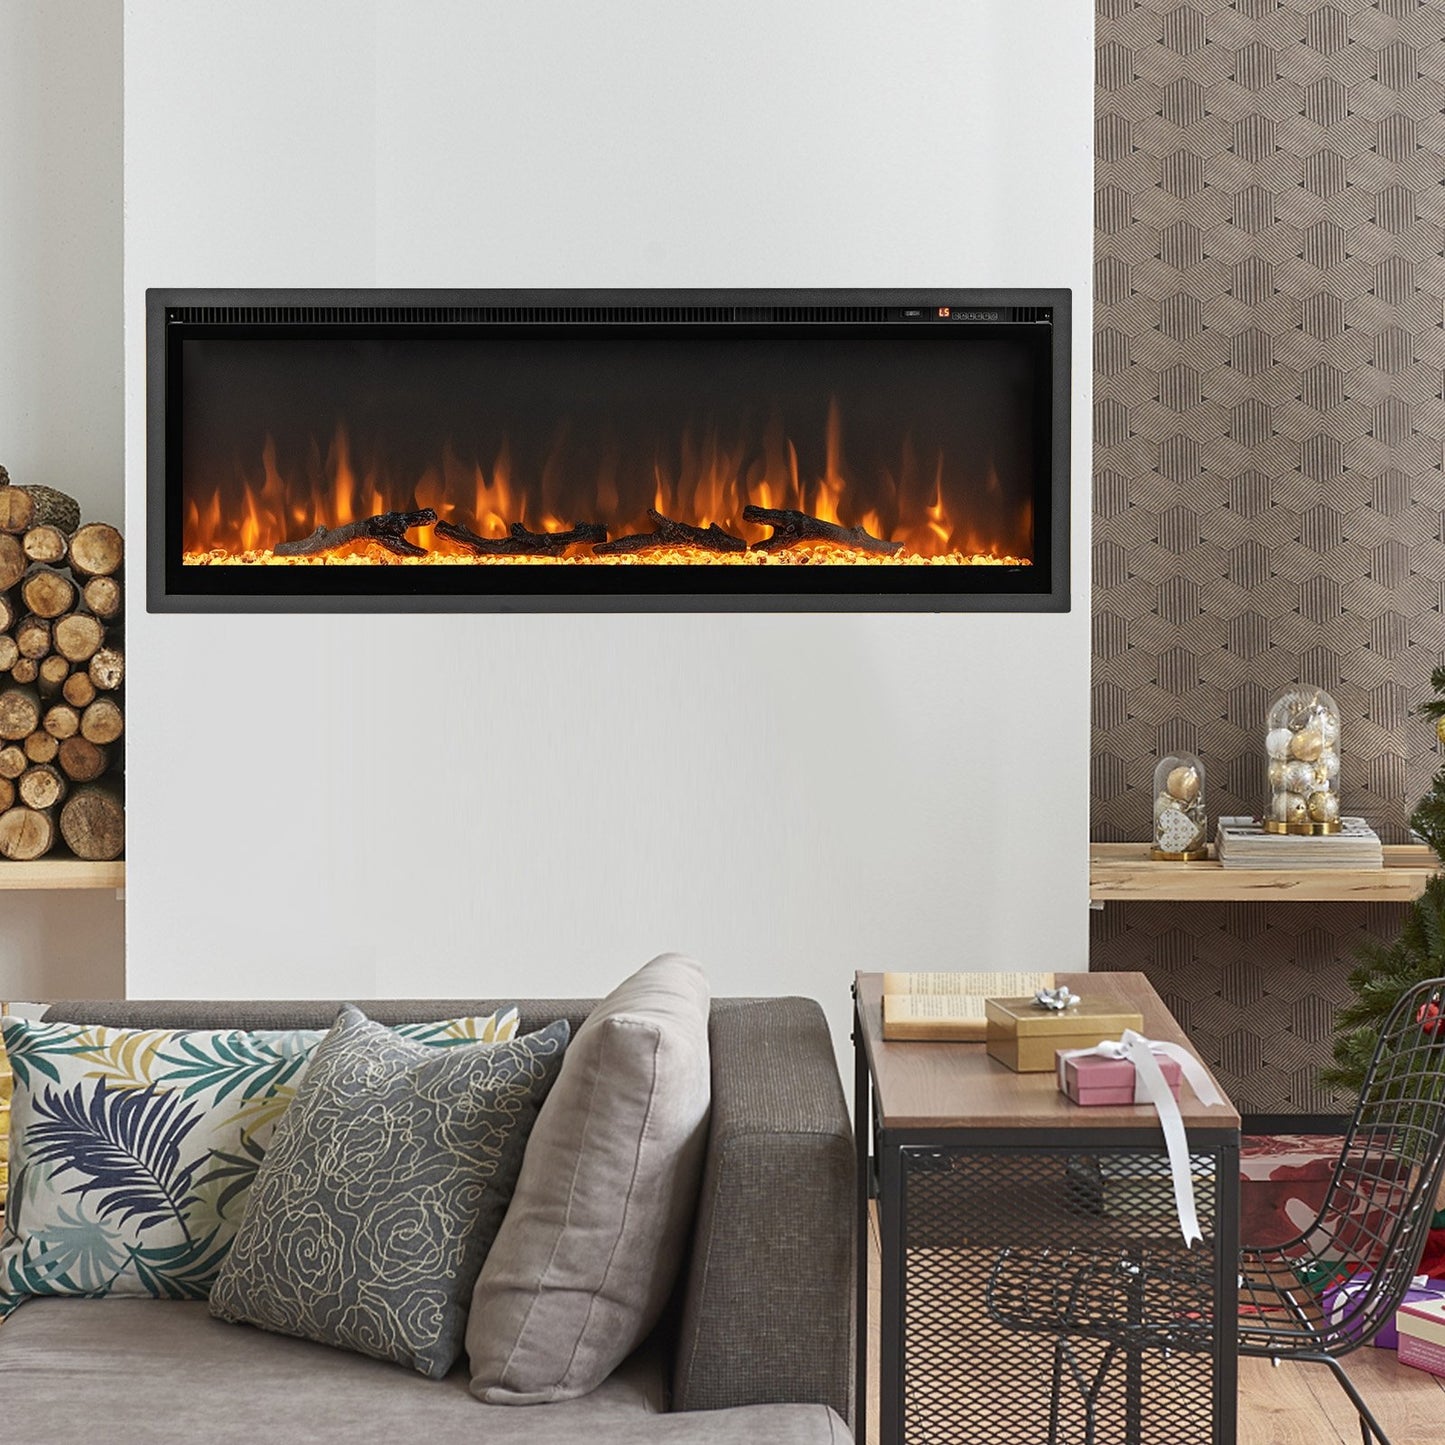 50 Inches Electric Fireplace in-Wall Recessed with Remote Control and Adjustable Color and Brightness-50 inches, Black